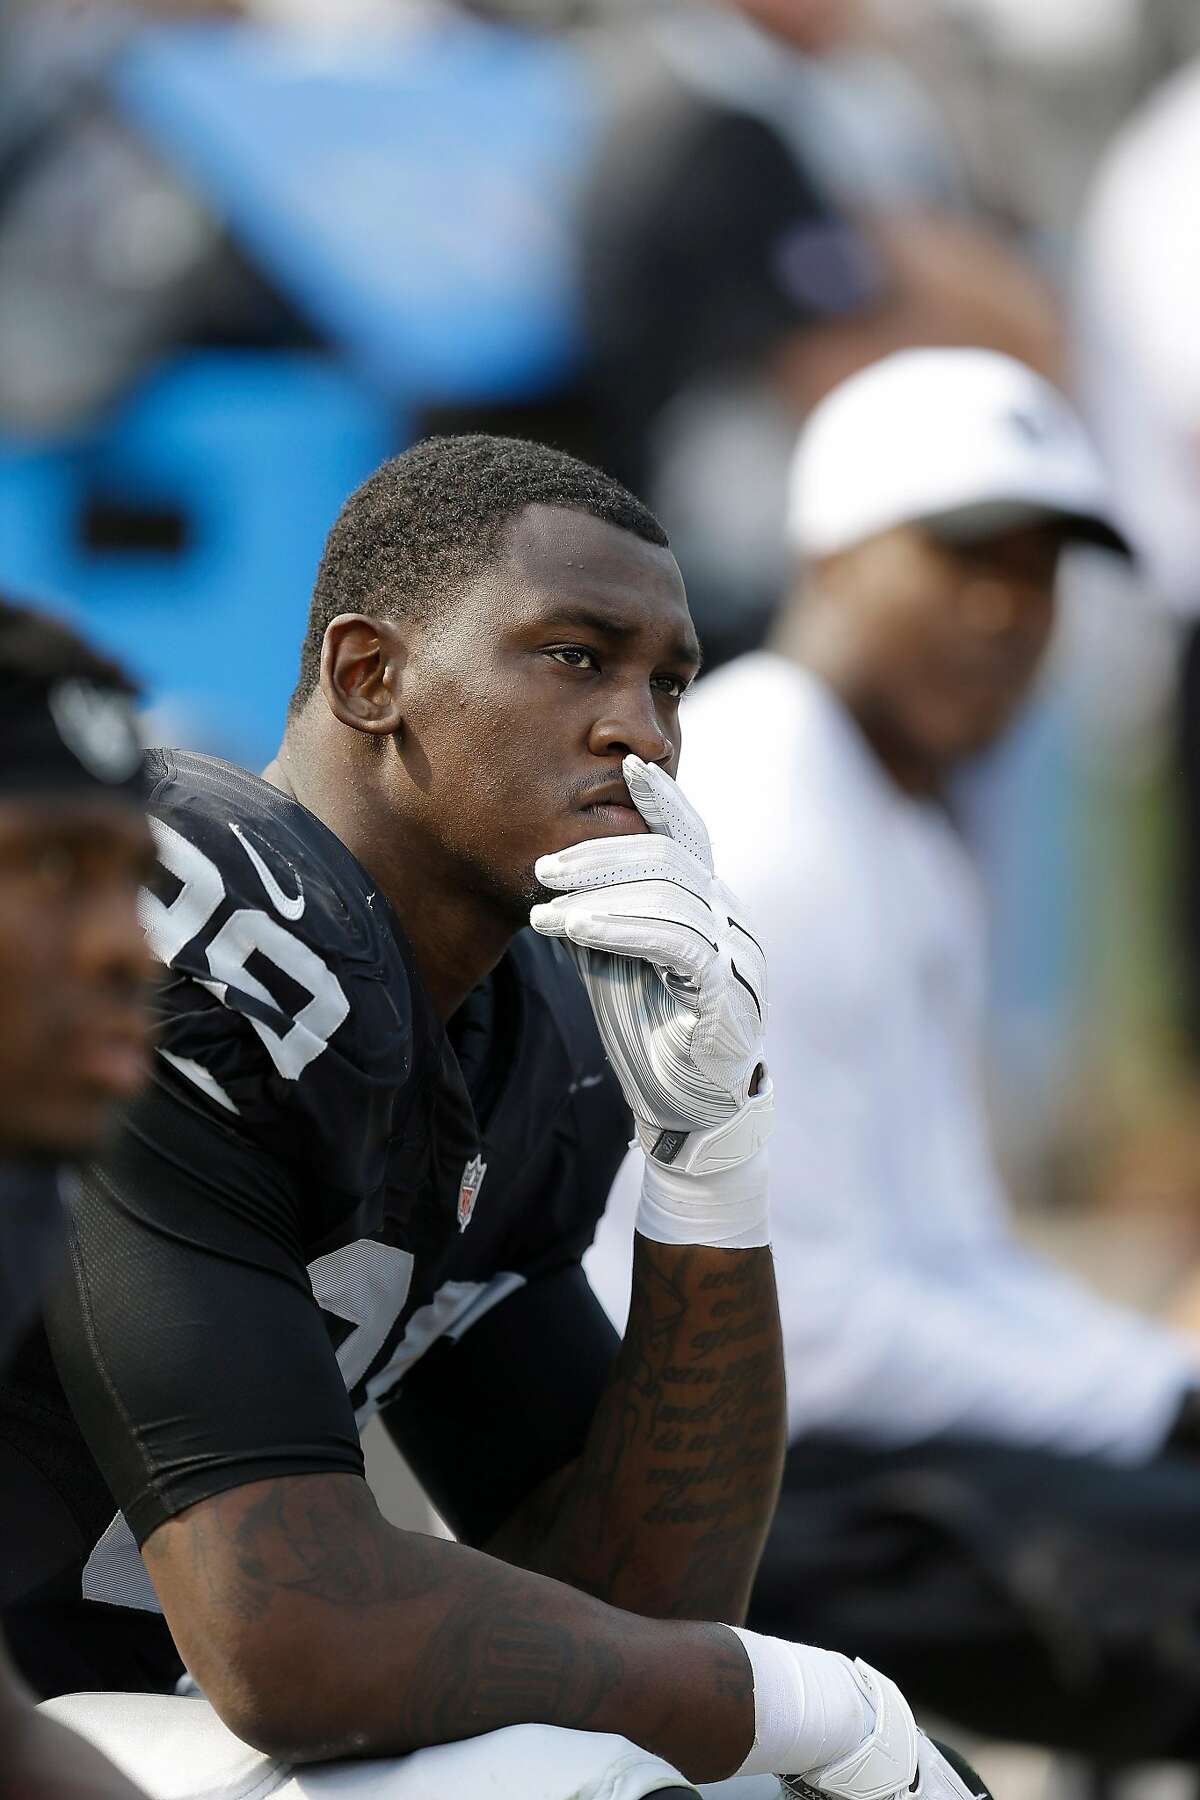 Oakland Raiders linebacker Aldon Smith (99) sits on the bench during the second half of an NFL football game against the Cincinnati Bengals in Oakland, Calif., Sunday, Sept. 13, 2015. (AP Photo/Ben Margot)